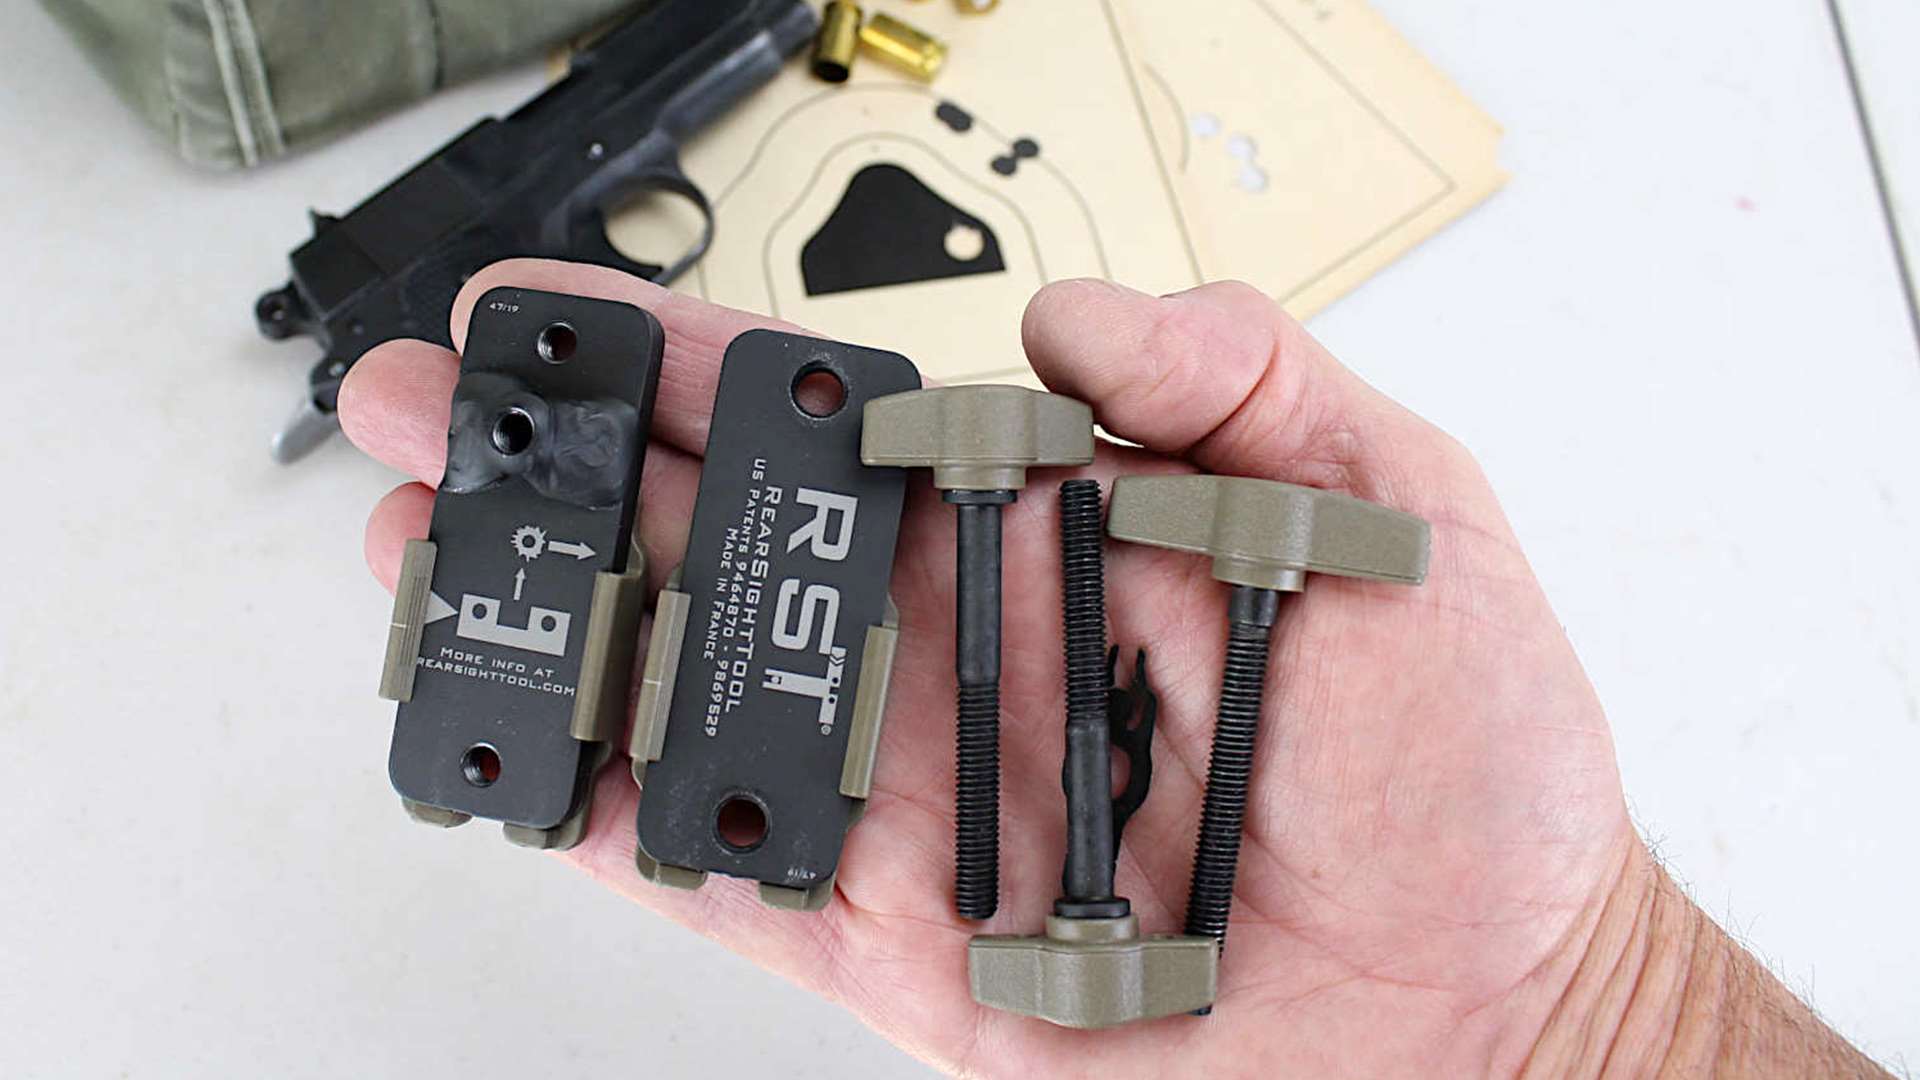 The compact RST (Rear Sight Tool) for pistols